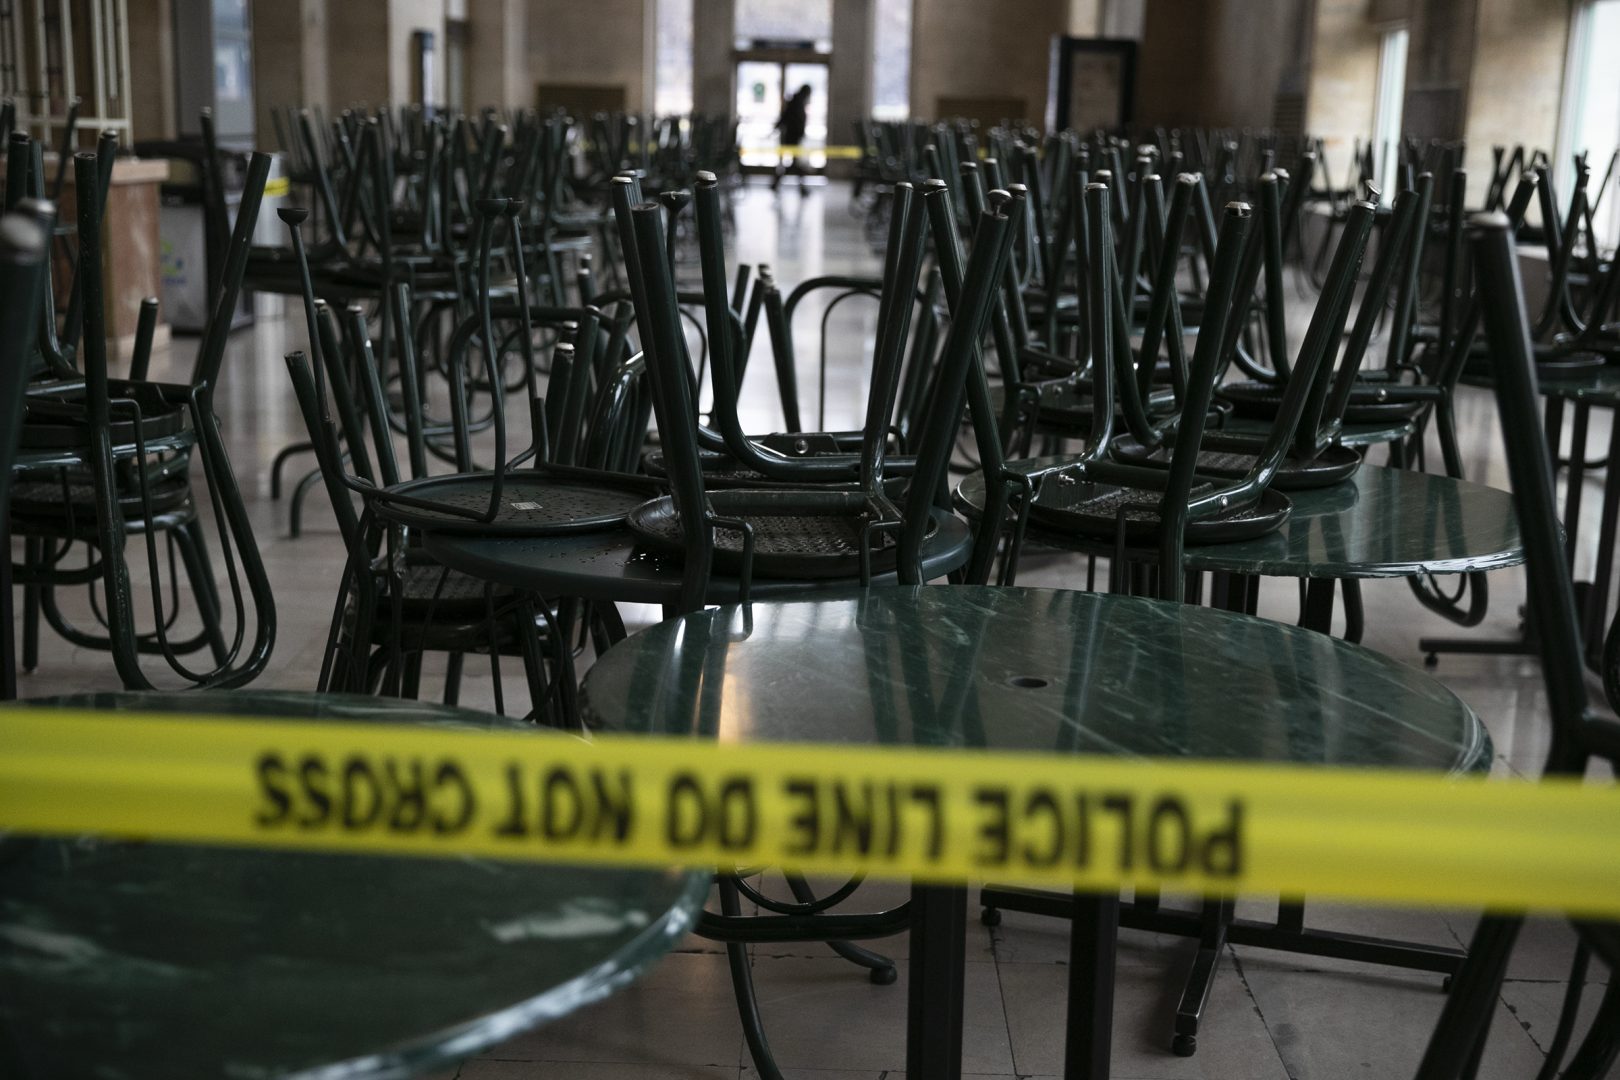 Chairs and tables are stacked inside the food court of 30th Street Station in Philadelphia on Tuesday, March 17, 2020. Pennsylvania Gov. Tom Wolf has ordered the statewide shutdown of nonessential Pennsylvania businesses for the next 14 days, while in Philadelphia Mayor Jim Kenney announced Monday a similar policy for the city due to the spread of the coronavirus. Restaurants will have to be take-out only. HEATHER KHALIFA / Philadelphia Inquirer